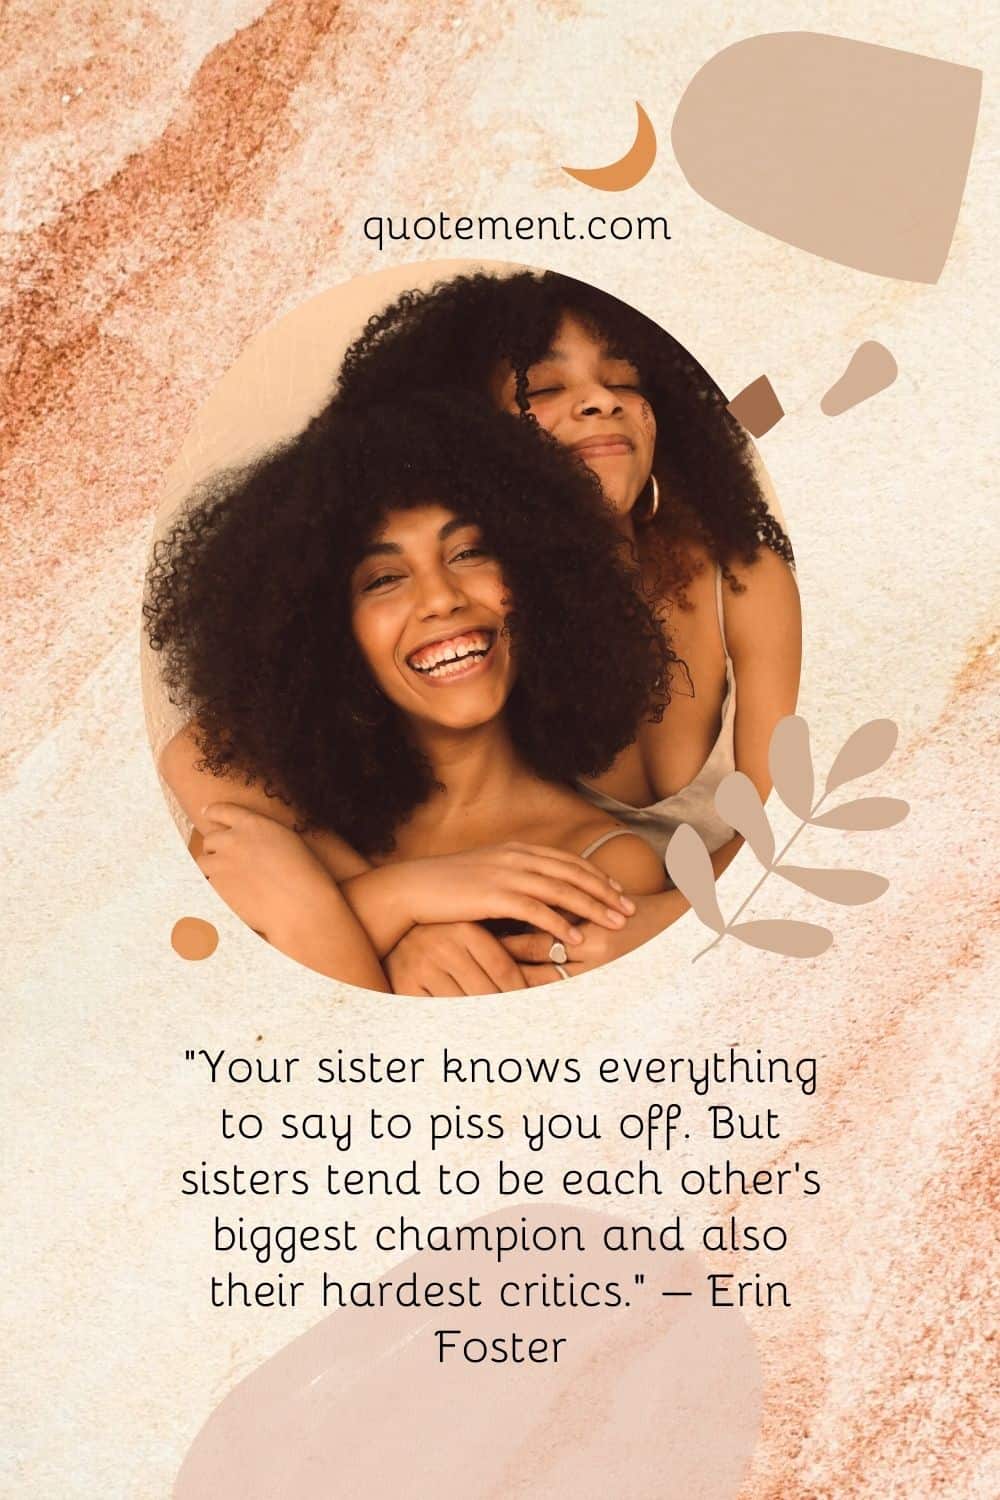 “Your sister knows everything to say to piss you off. But sisters tend to be each other’s biggest champion and also their hardest critics.” – Erin Foster